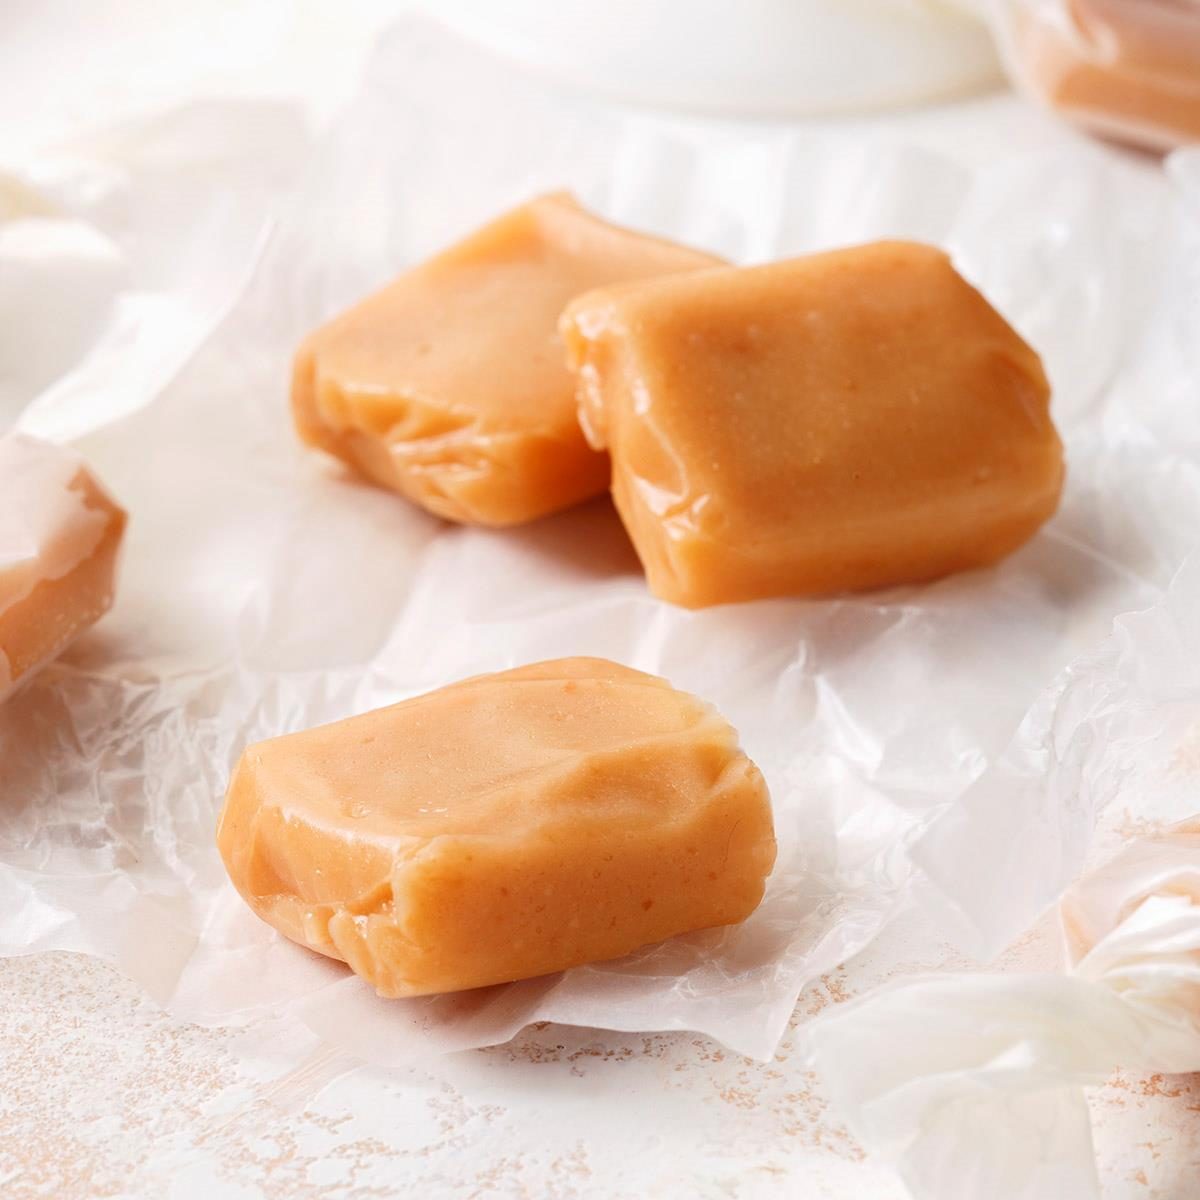 Homemade Caramel Candy Recipe - Taste and Tell